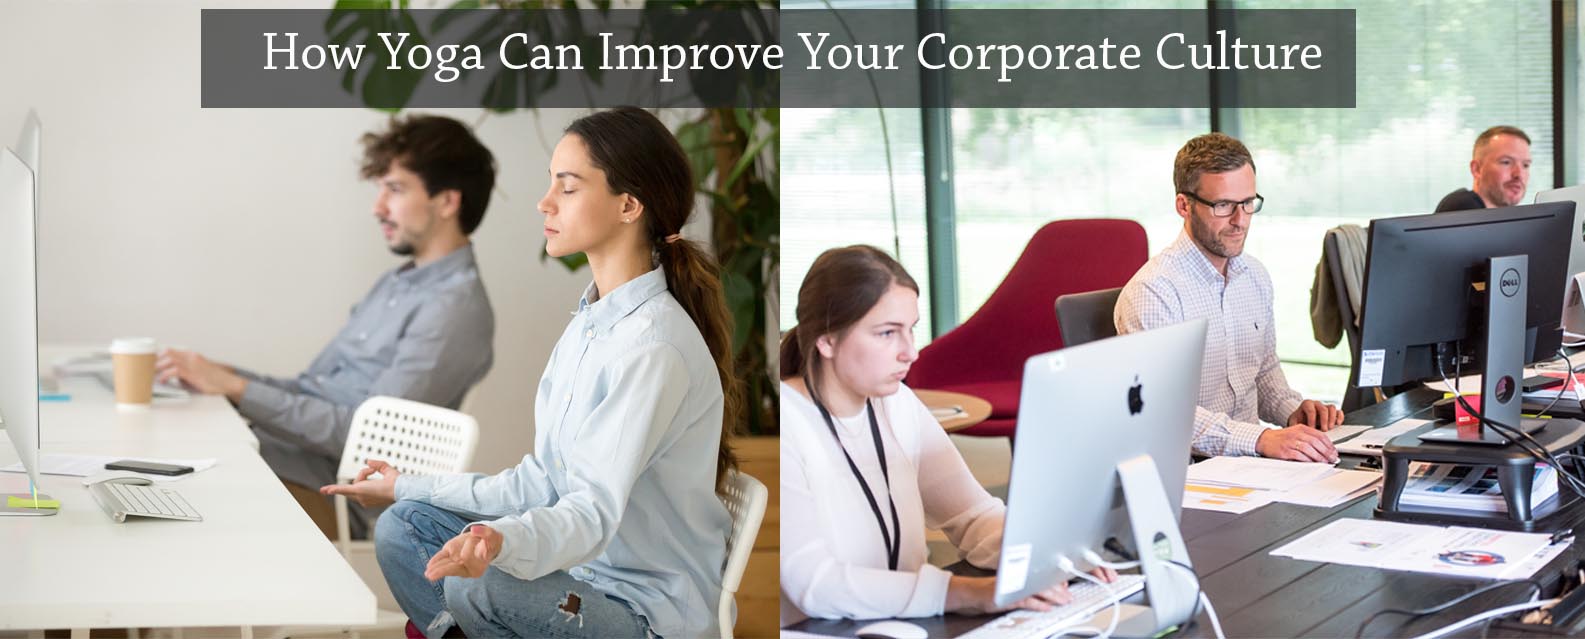 how yoga can improve your corporate culture